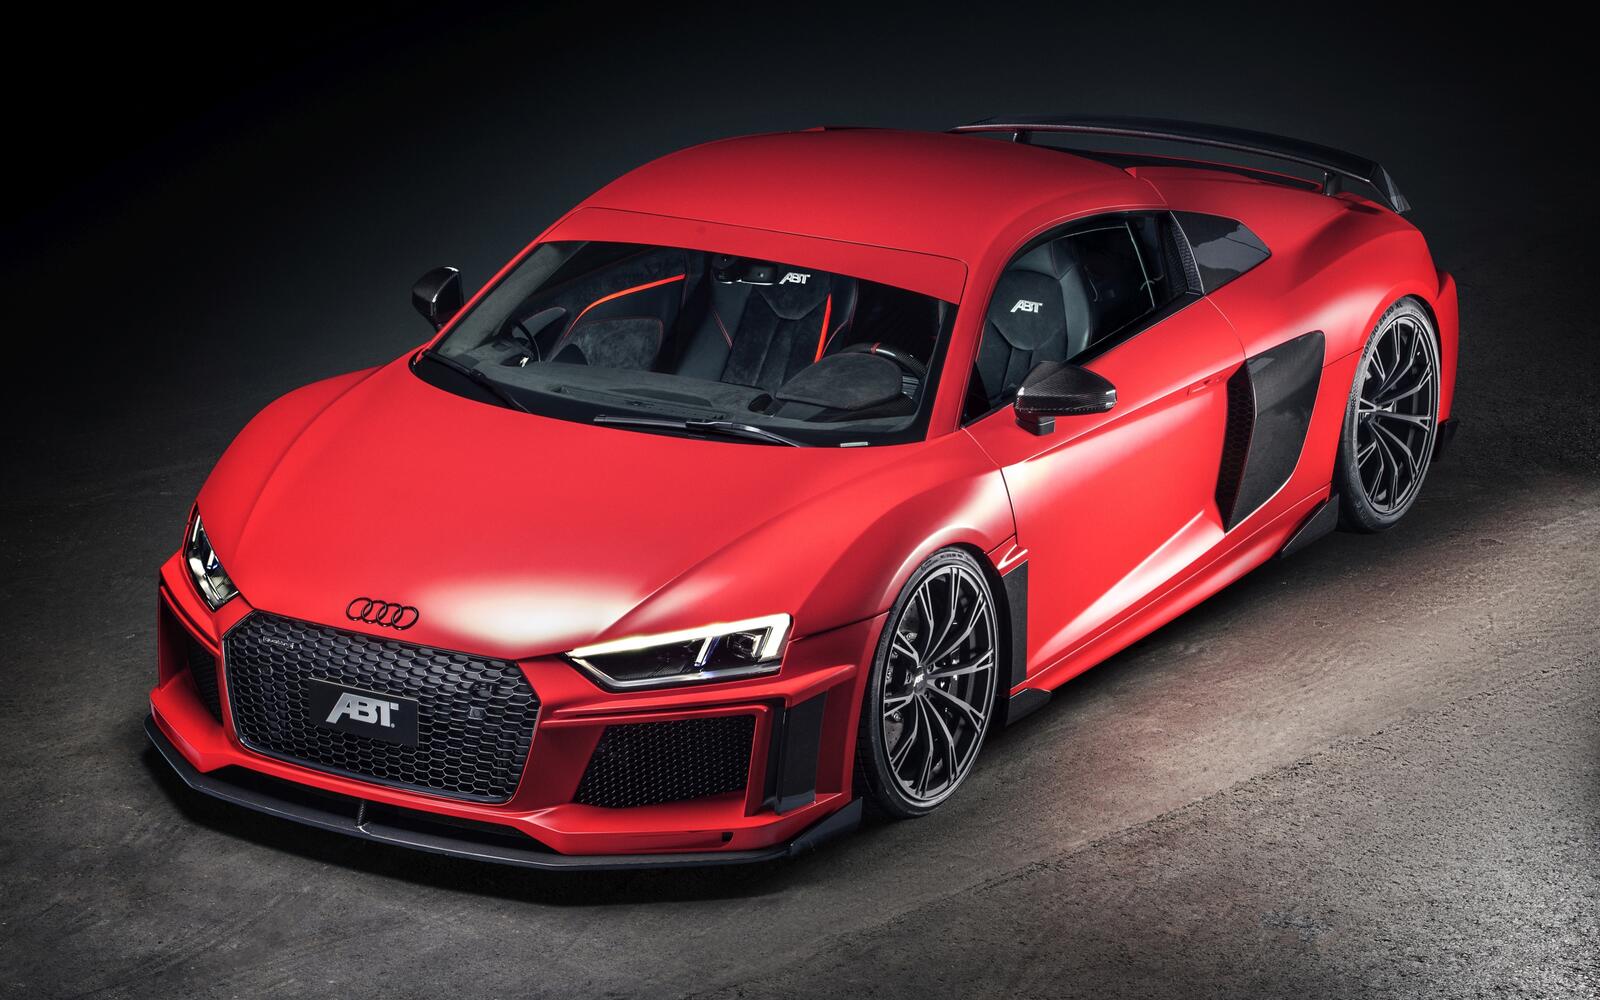 Wallpapers red Audi R8 cars on the desktop